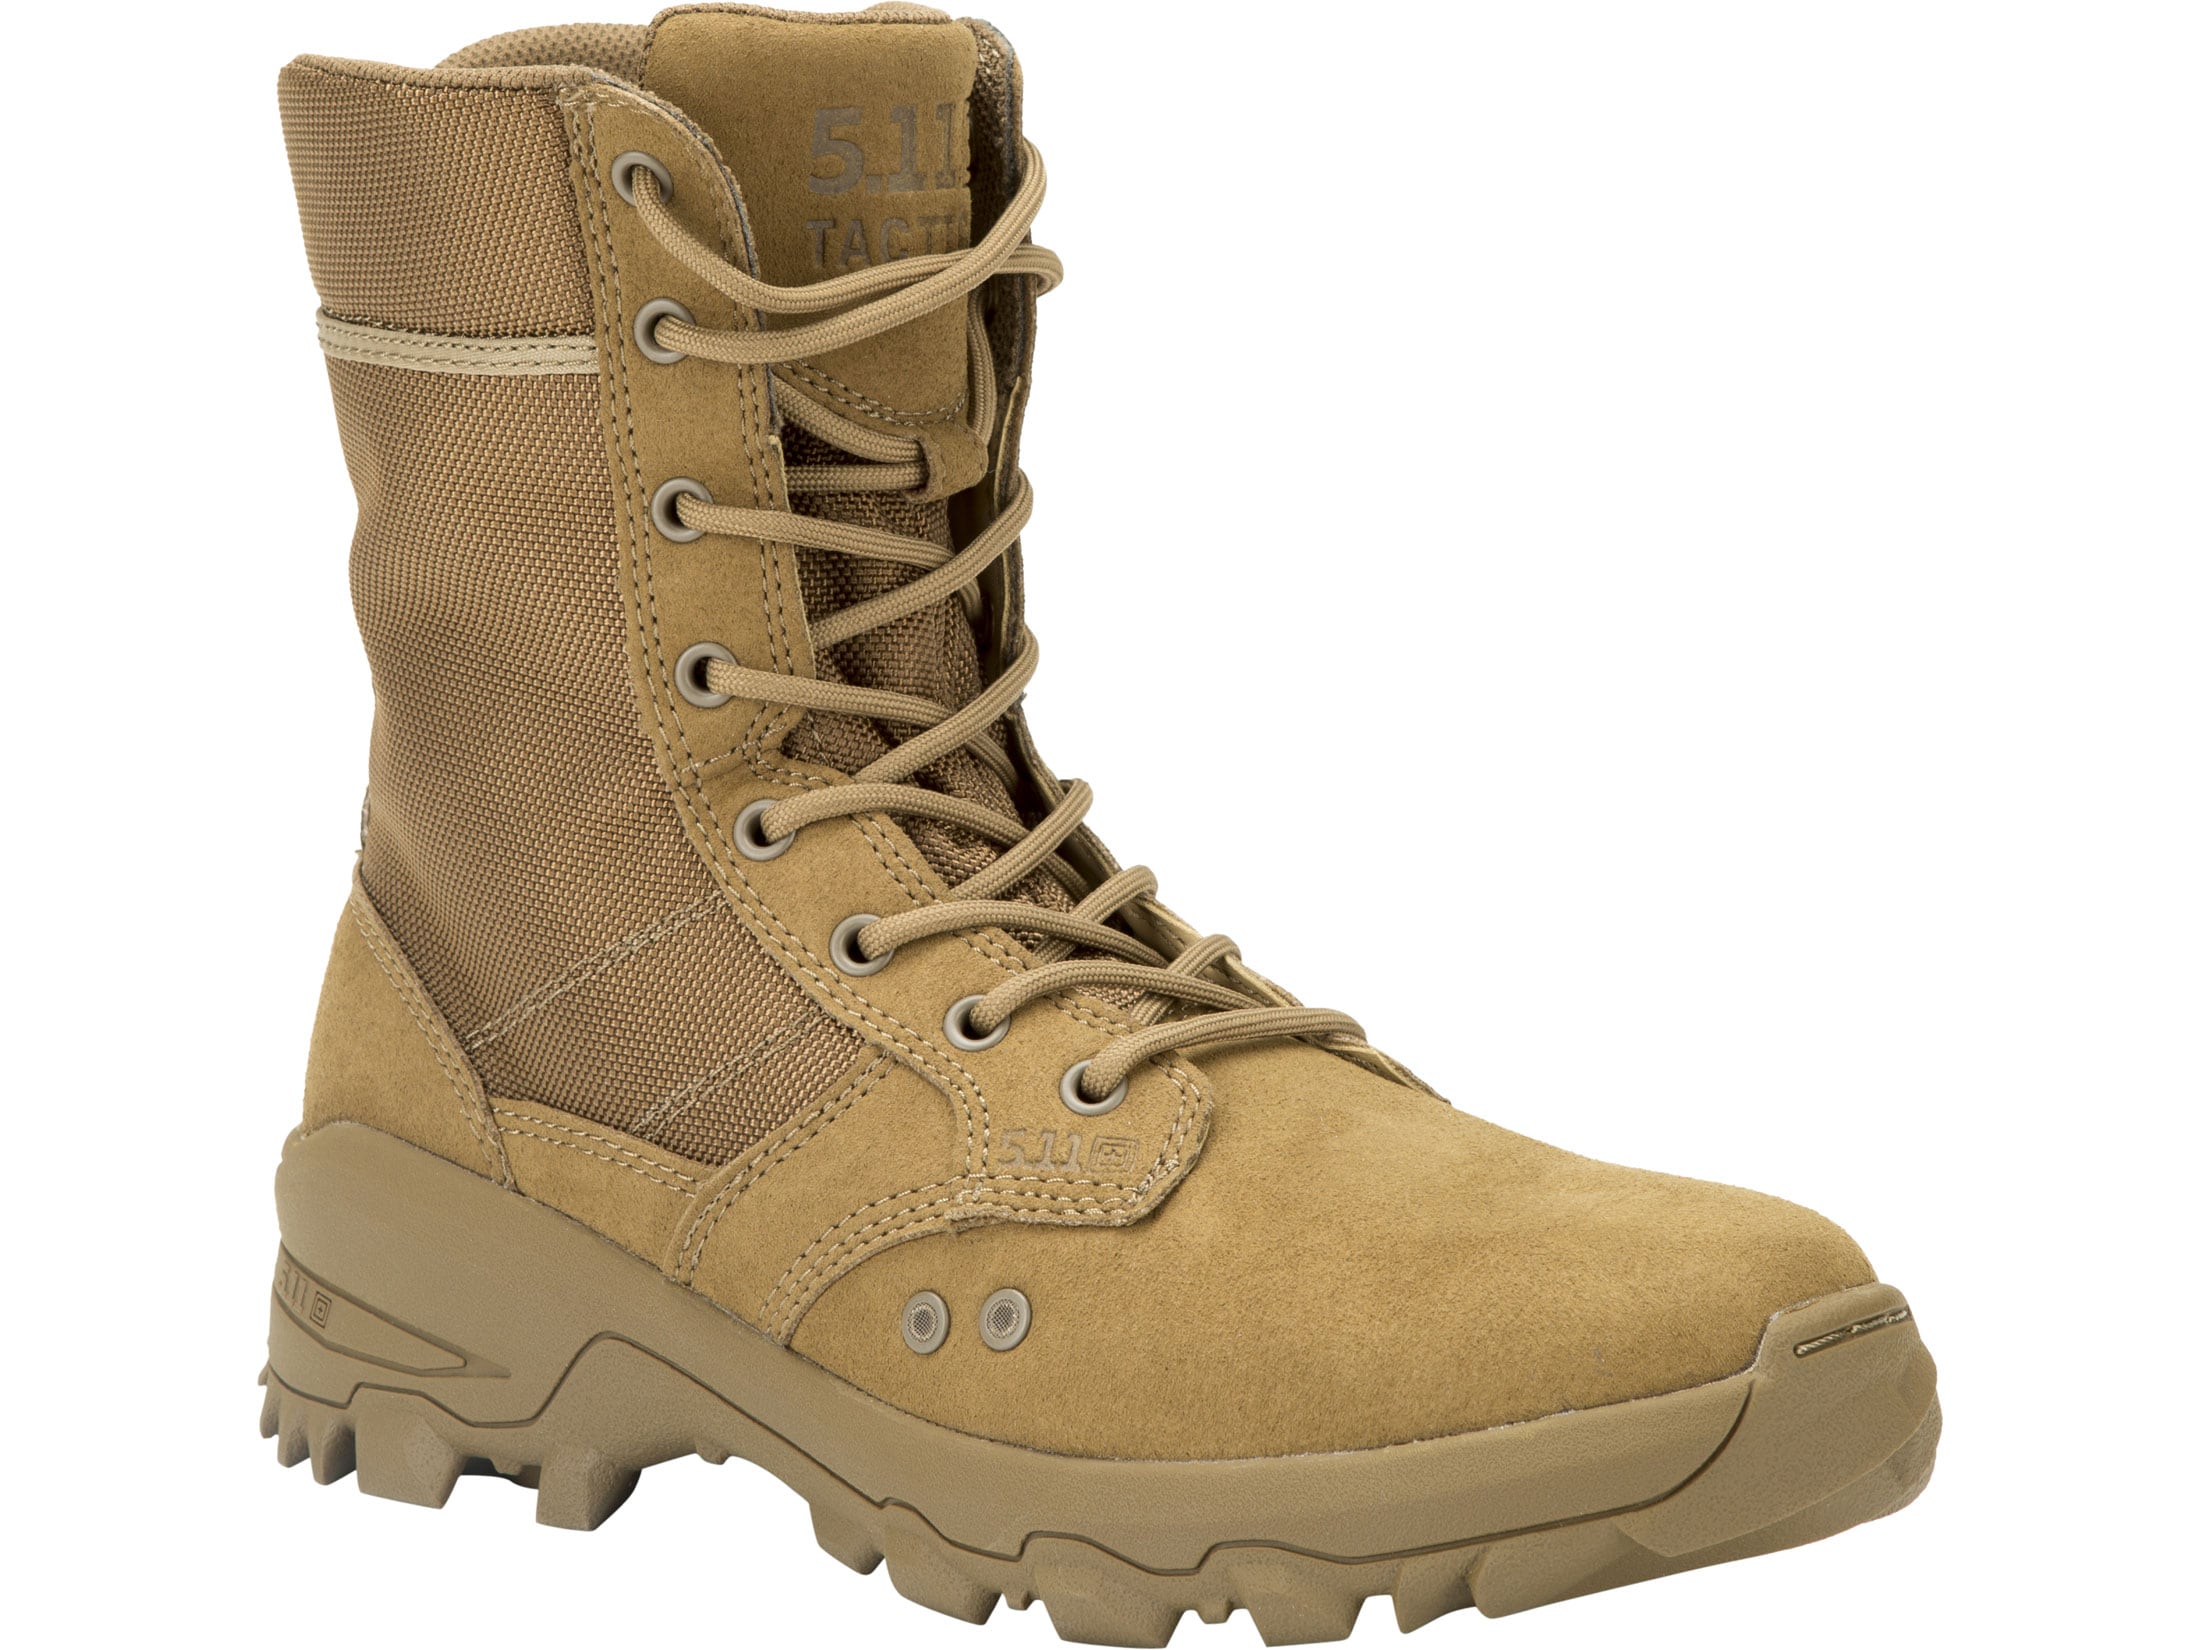 Dark Brown Tactical Boots | vlr.eng.br